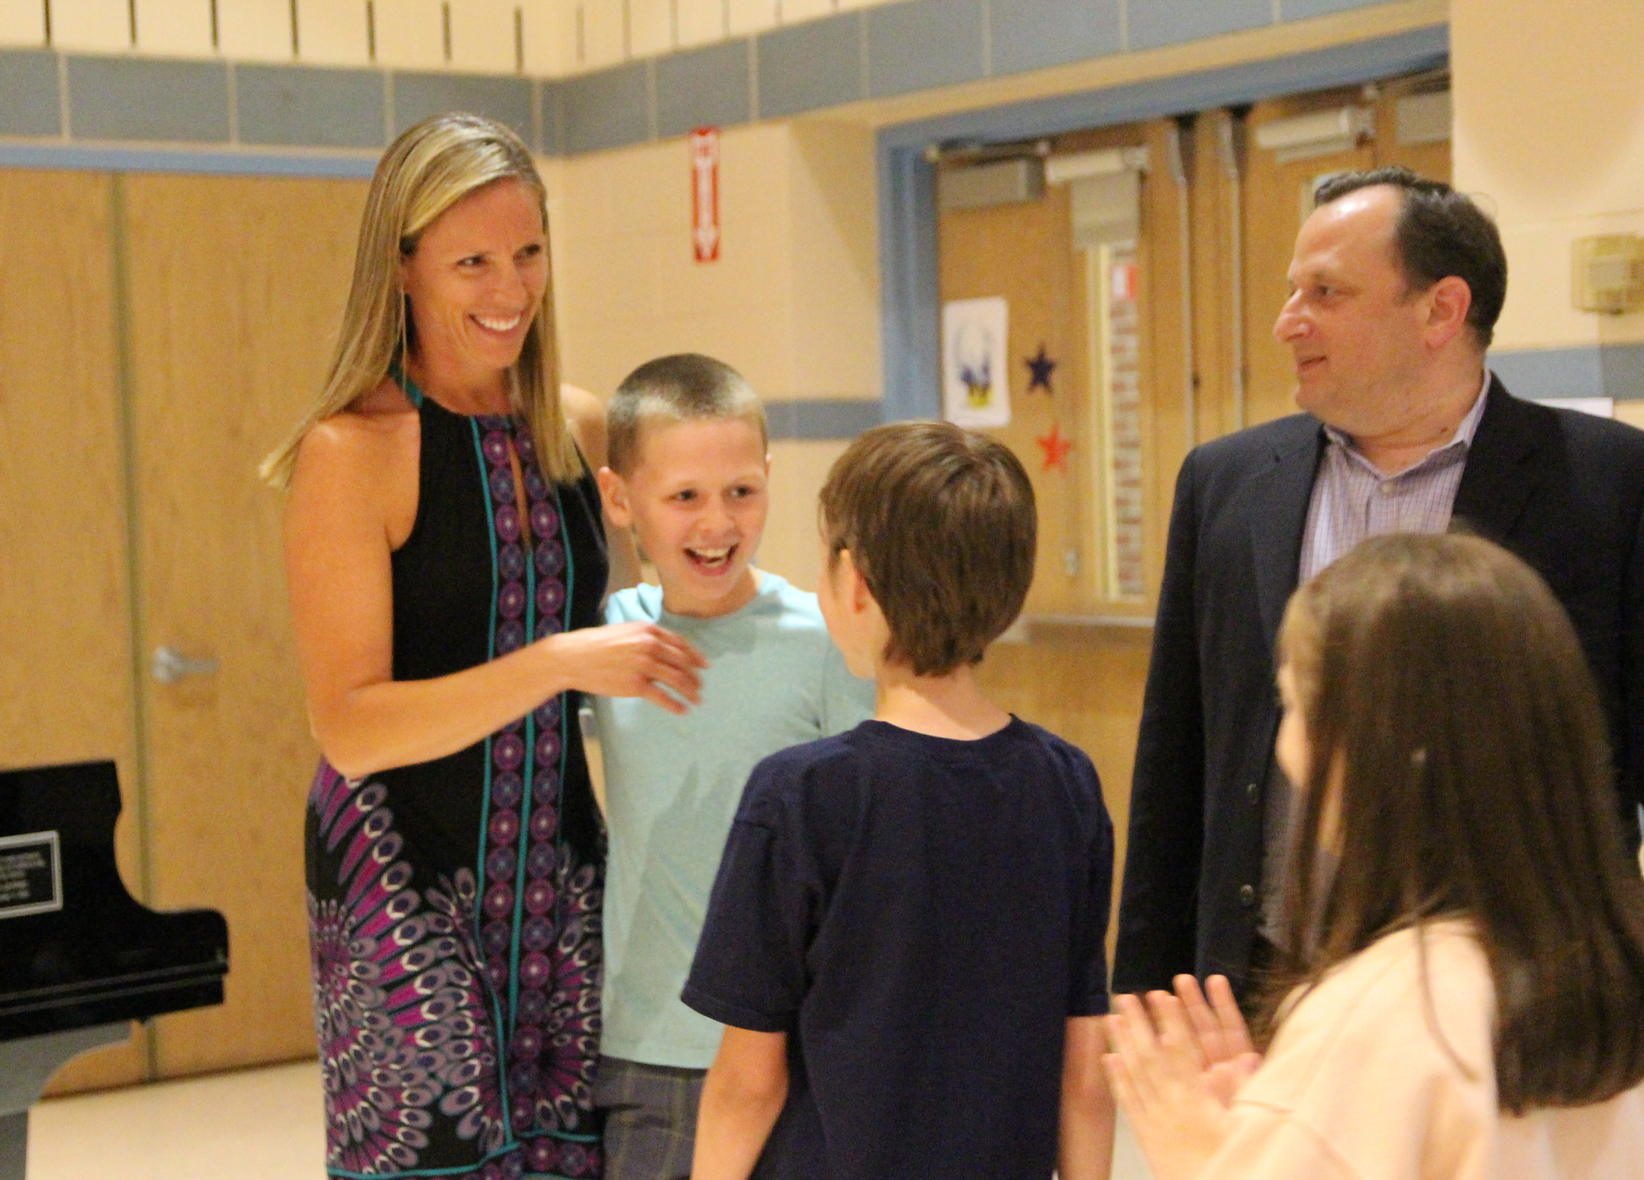 Students of students North Mianus School grade 3 teacher Crystal Kitselman who was named Teacher of the Year. June 14, 2019. Photo: Leslie Yager